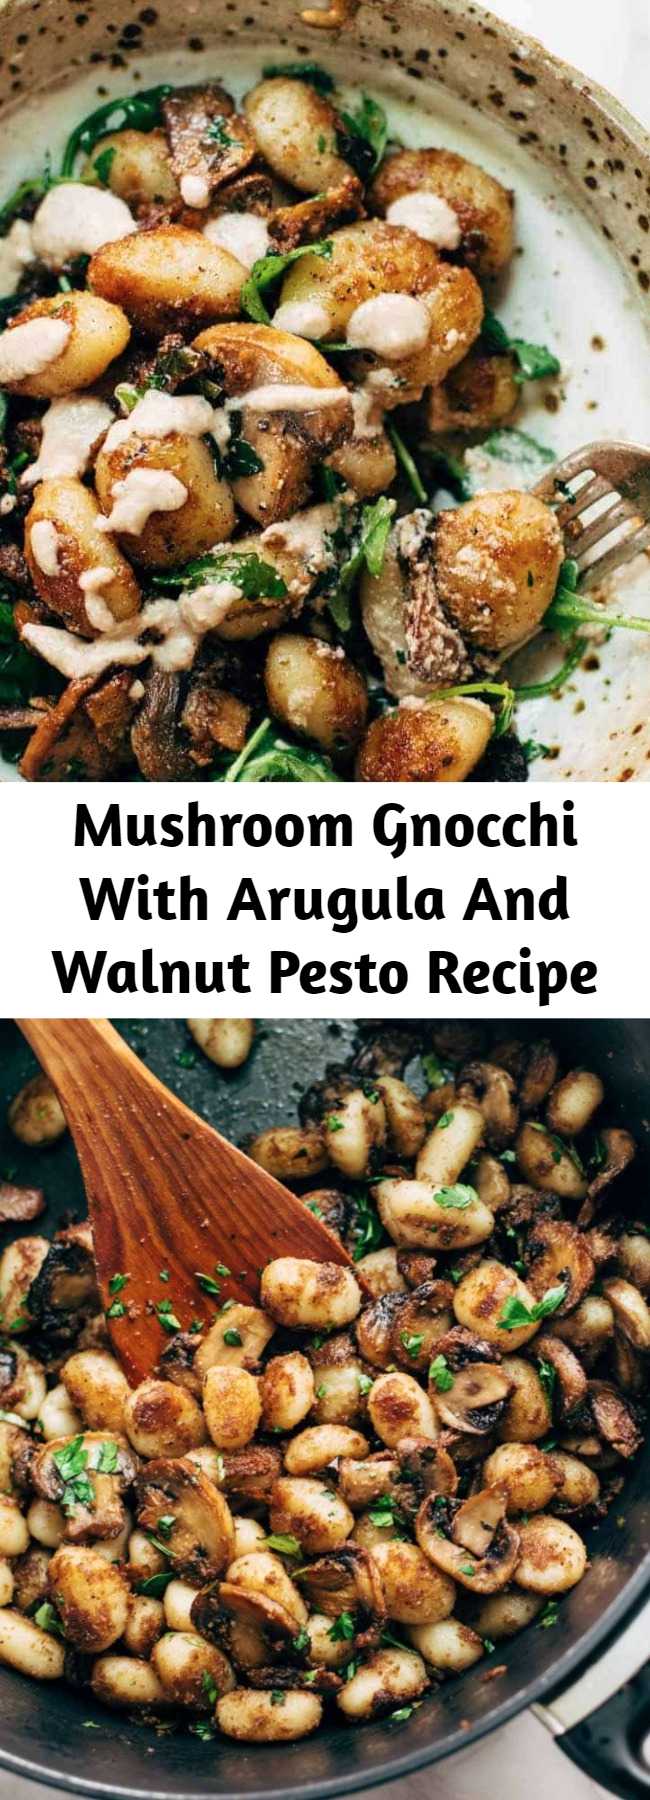 Mushroom Gnocchi With Arugula And Walnut Pesto Recipe - a vegetarian bowl that’s made with familiar ingredients. Comes together in 30 minutes or less!